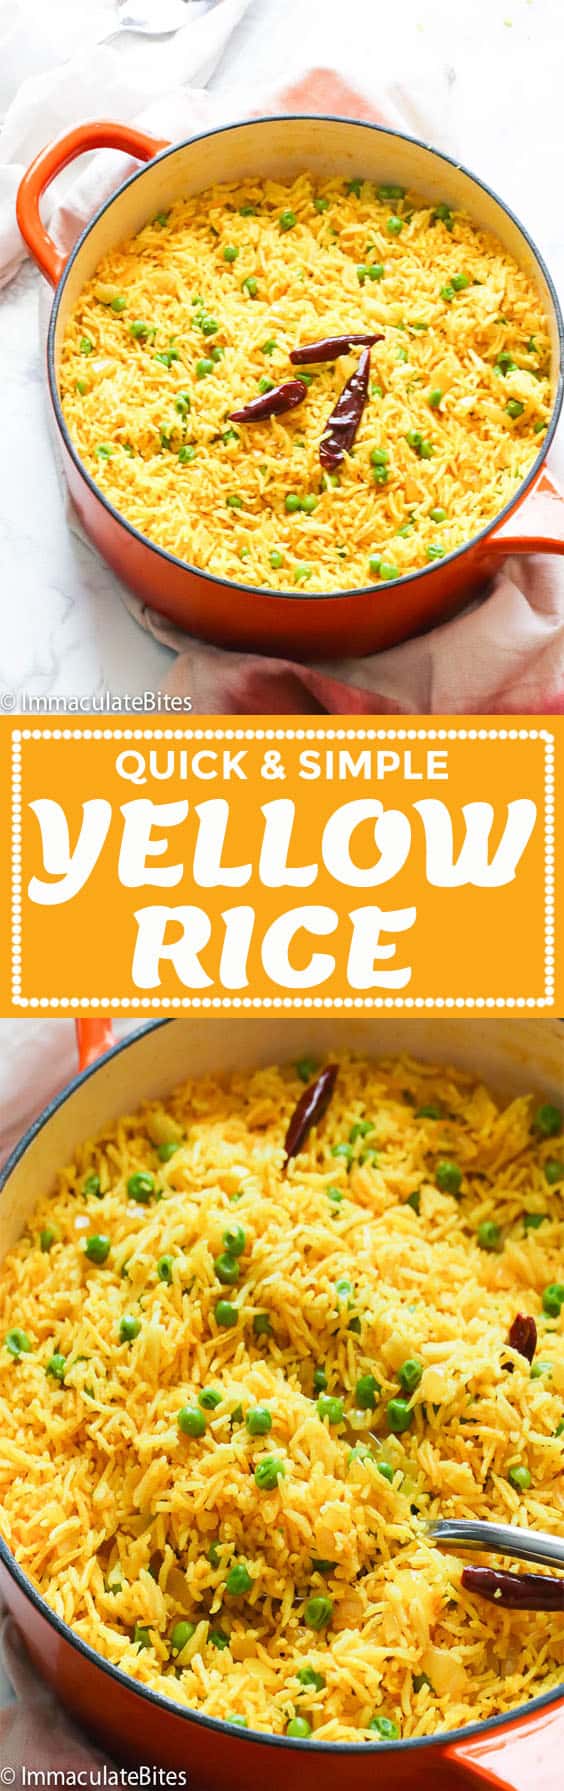 Yellow Rice Immaculate Bites,Best Cordless Drill